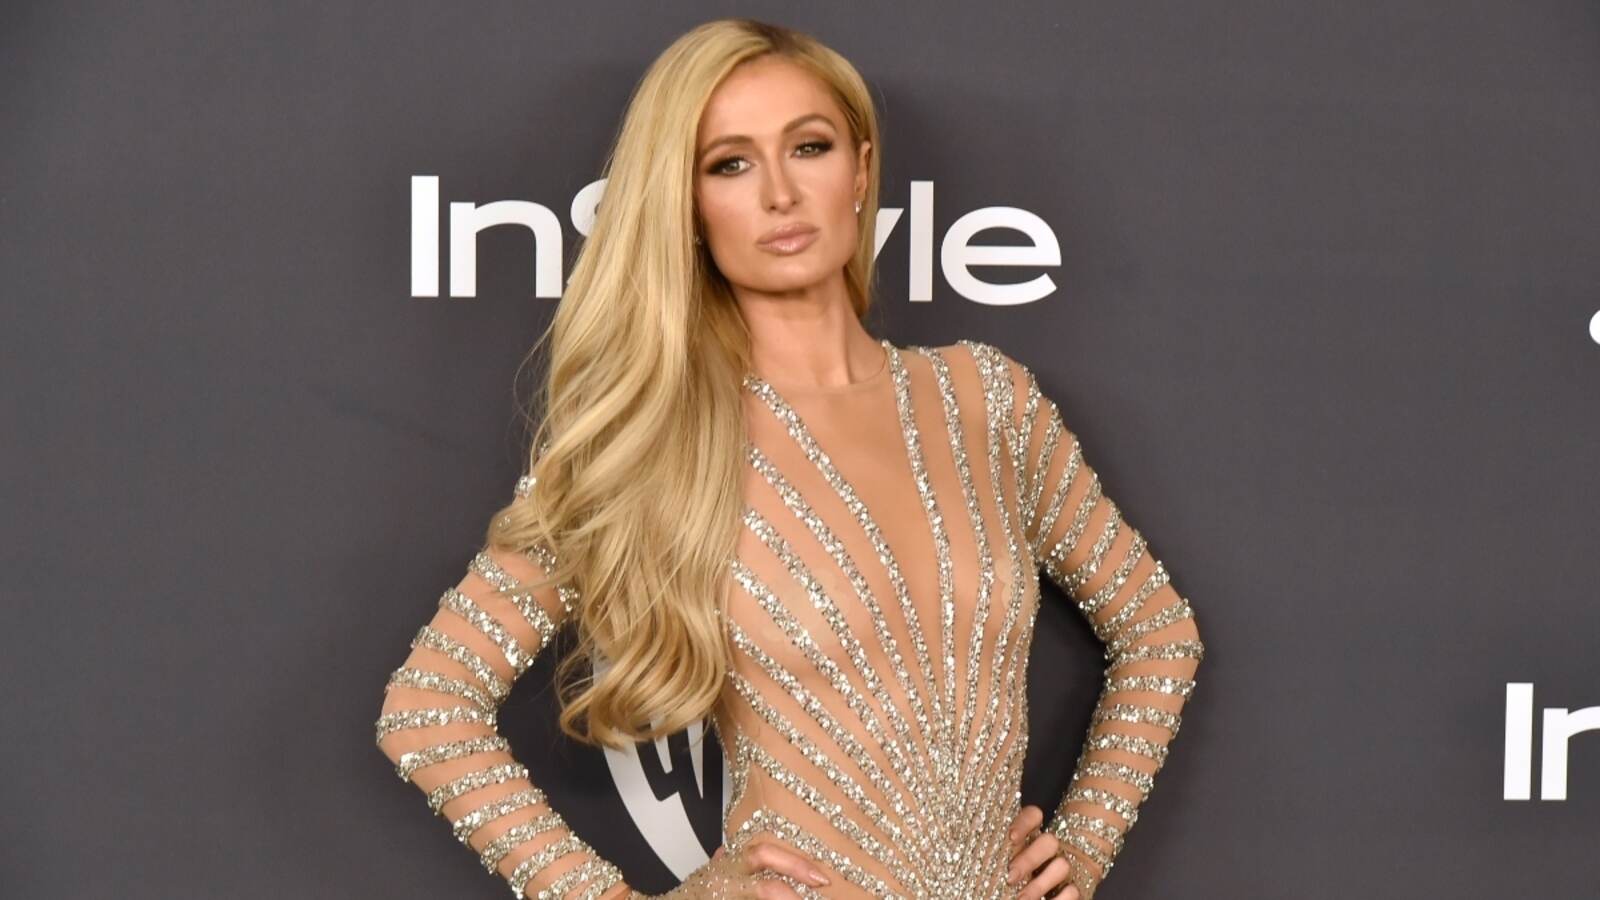 Paris Hilton Net Worth, Career, Husband, House And More First Curiosity